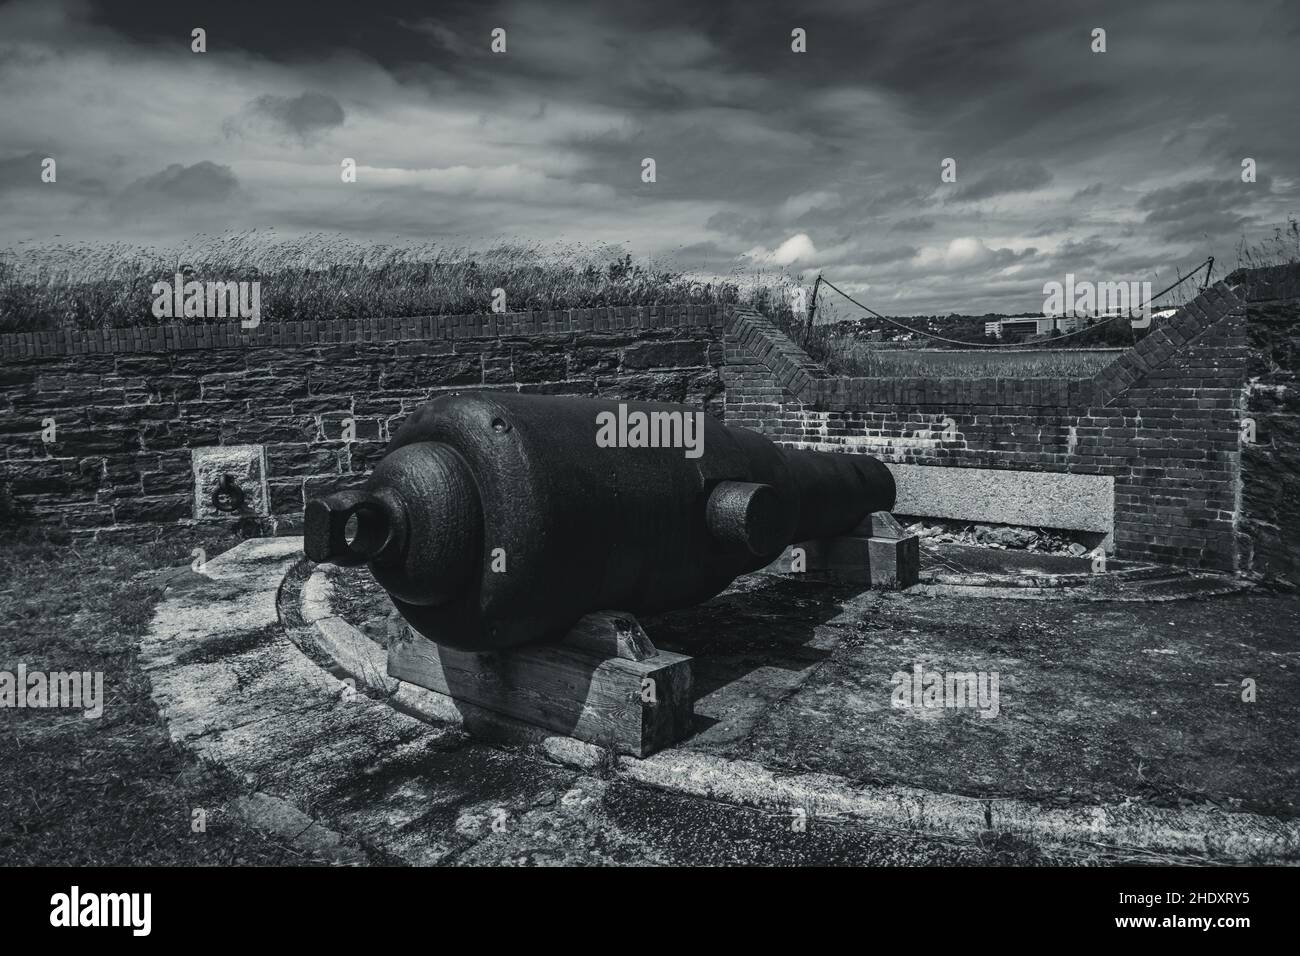 9-Zoll-rml-Kanone in Fort charlotte auf georges Island Stockfoto